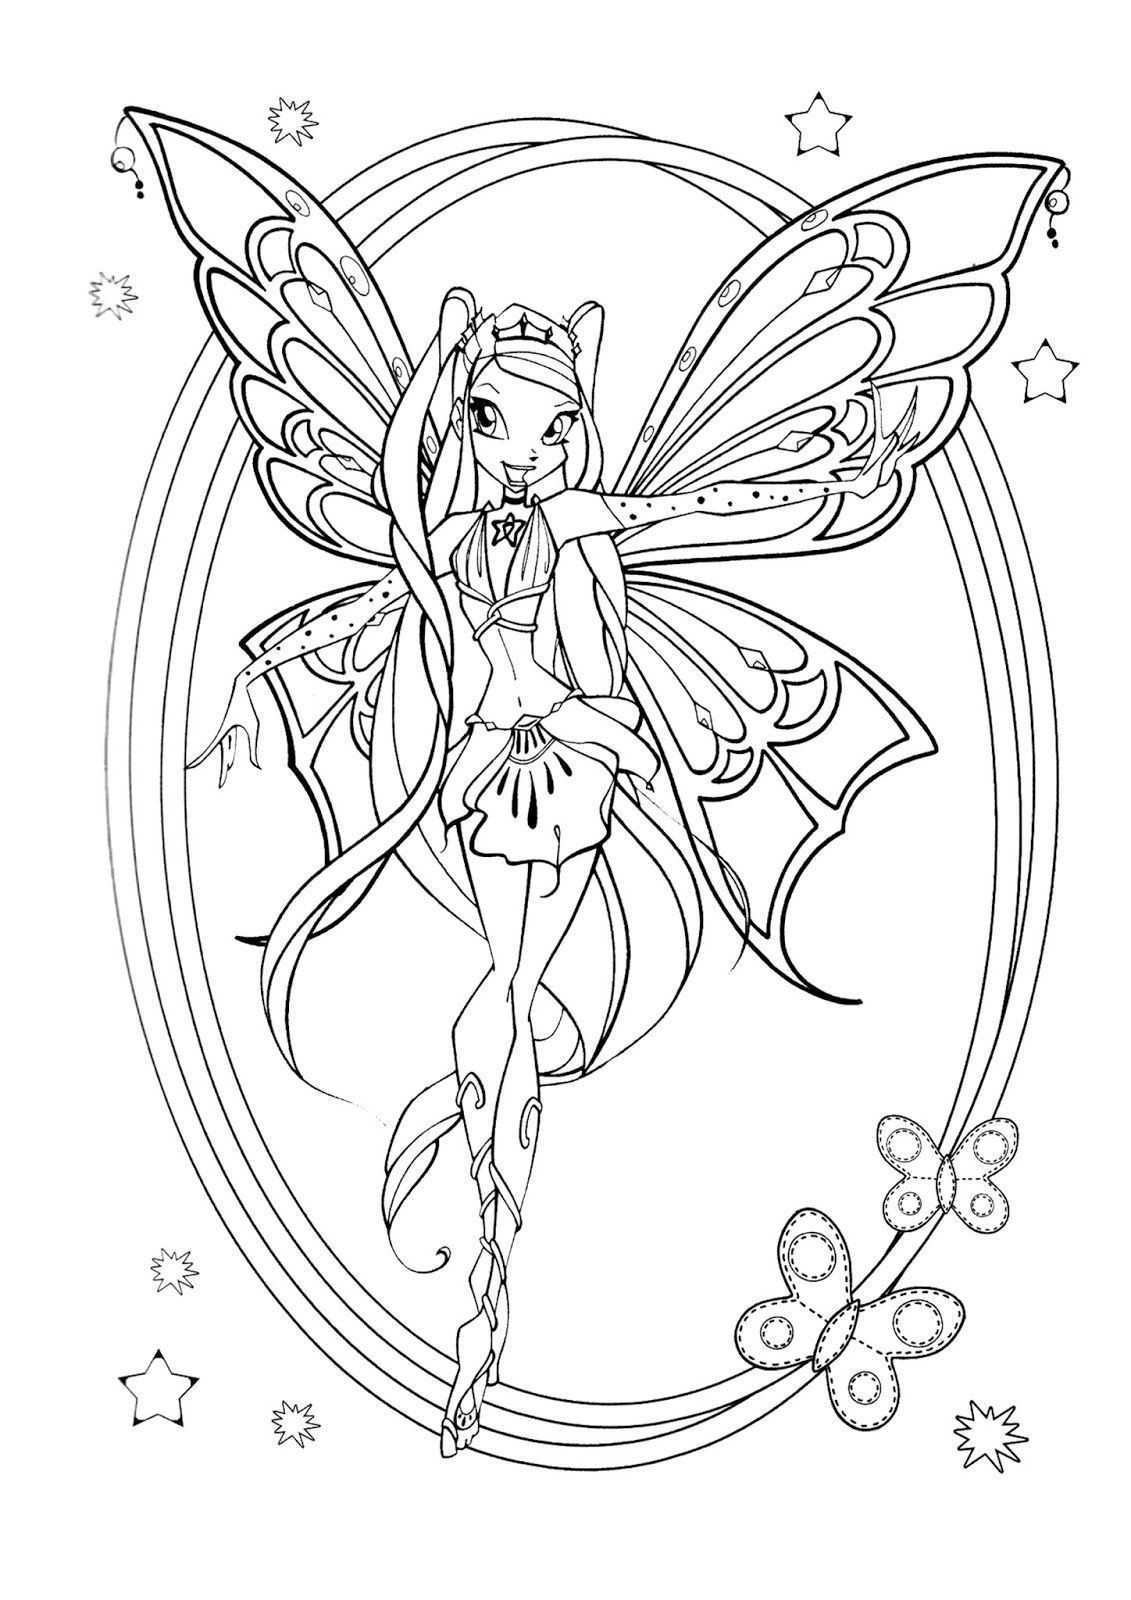 Winx Club Coloring Pages Best Of Awesome Musa Winx Coloring Pages Fansites Fairy Colo